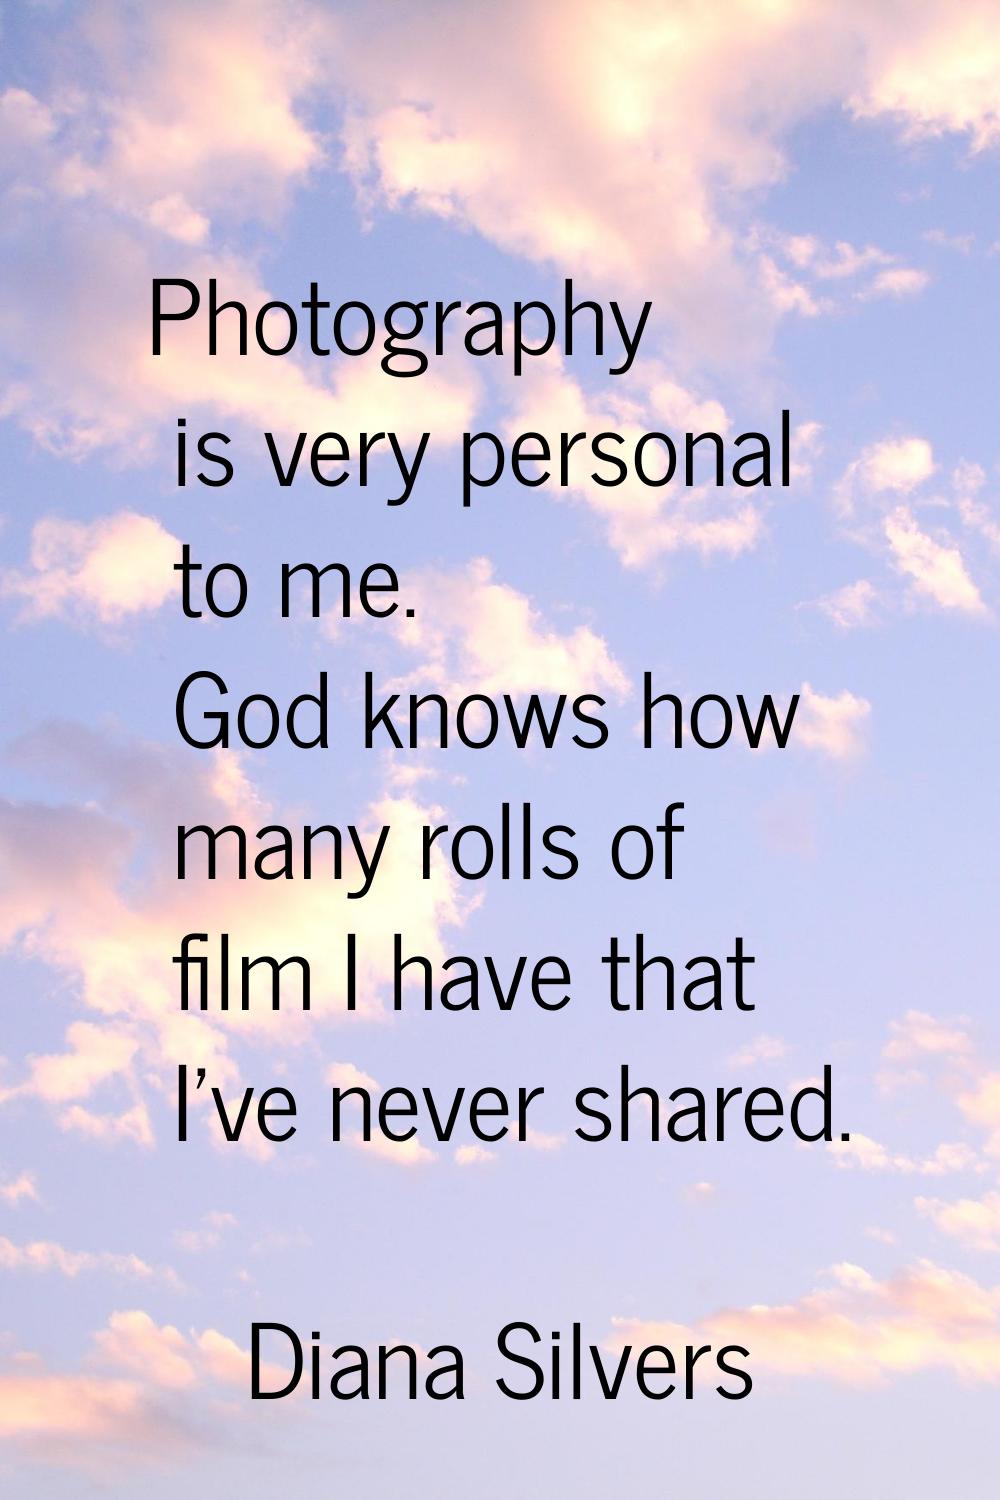 Photography is very personal to me. God knows how many rolls of film I have that I've never shared.